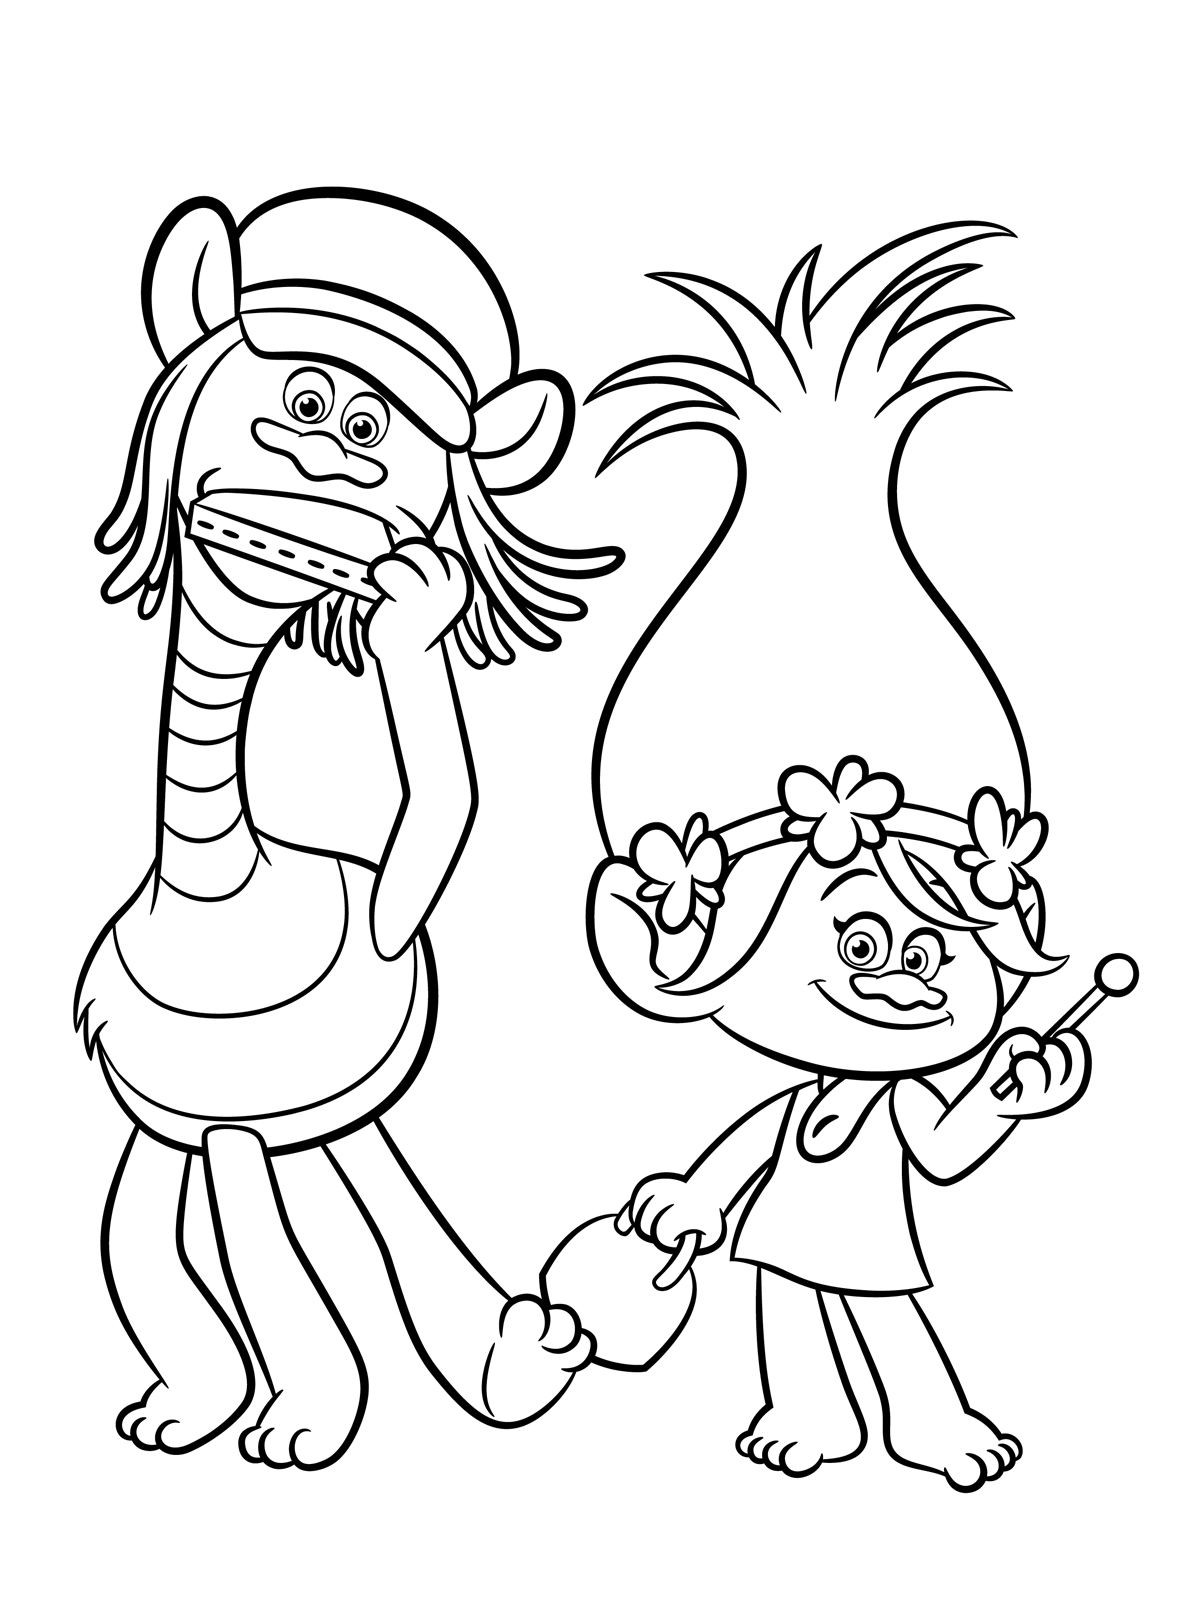 Disney Coloring Pages For Kids
 Disney Coloring Pages Best Coloring Pages For Kids